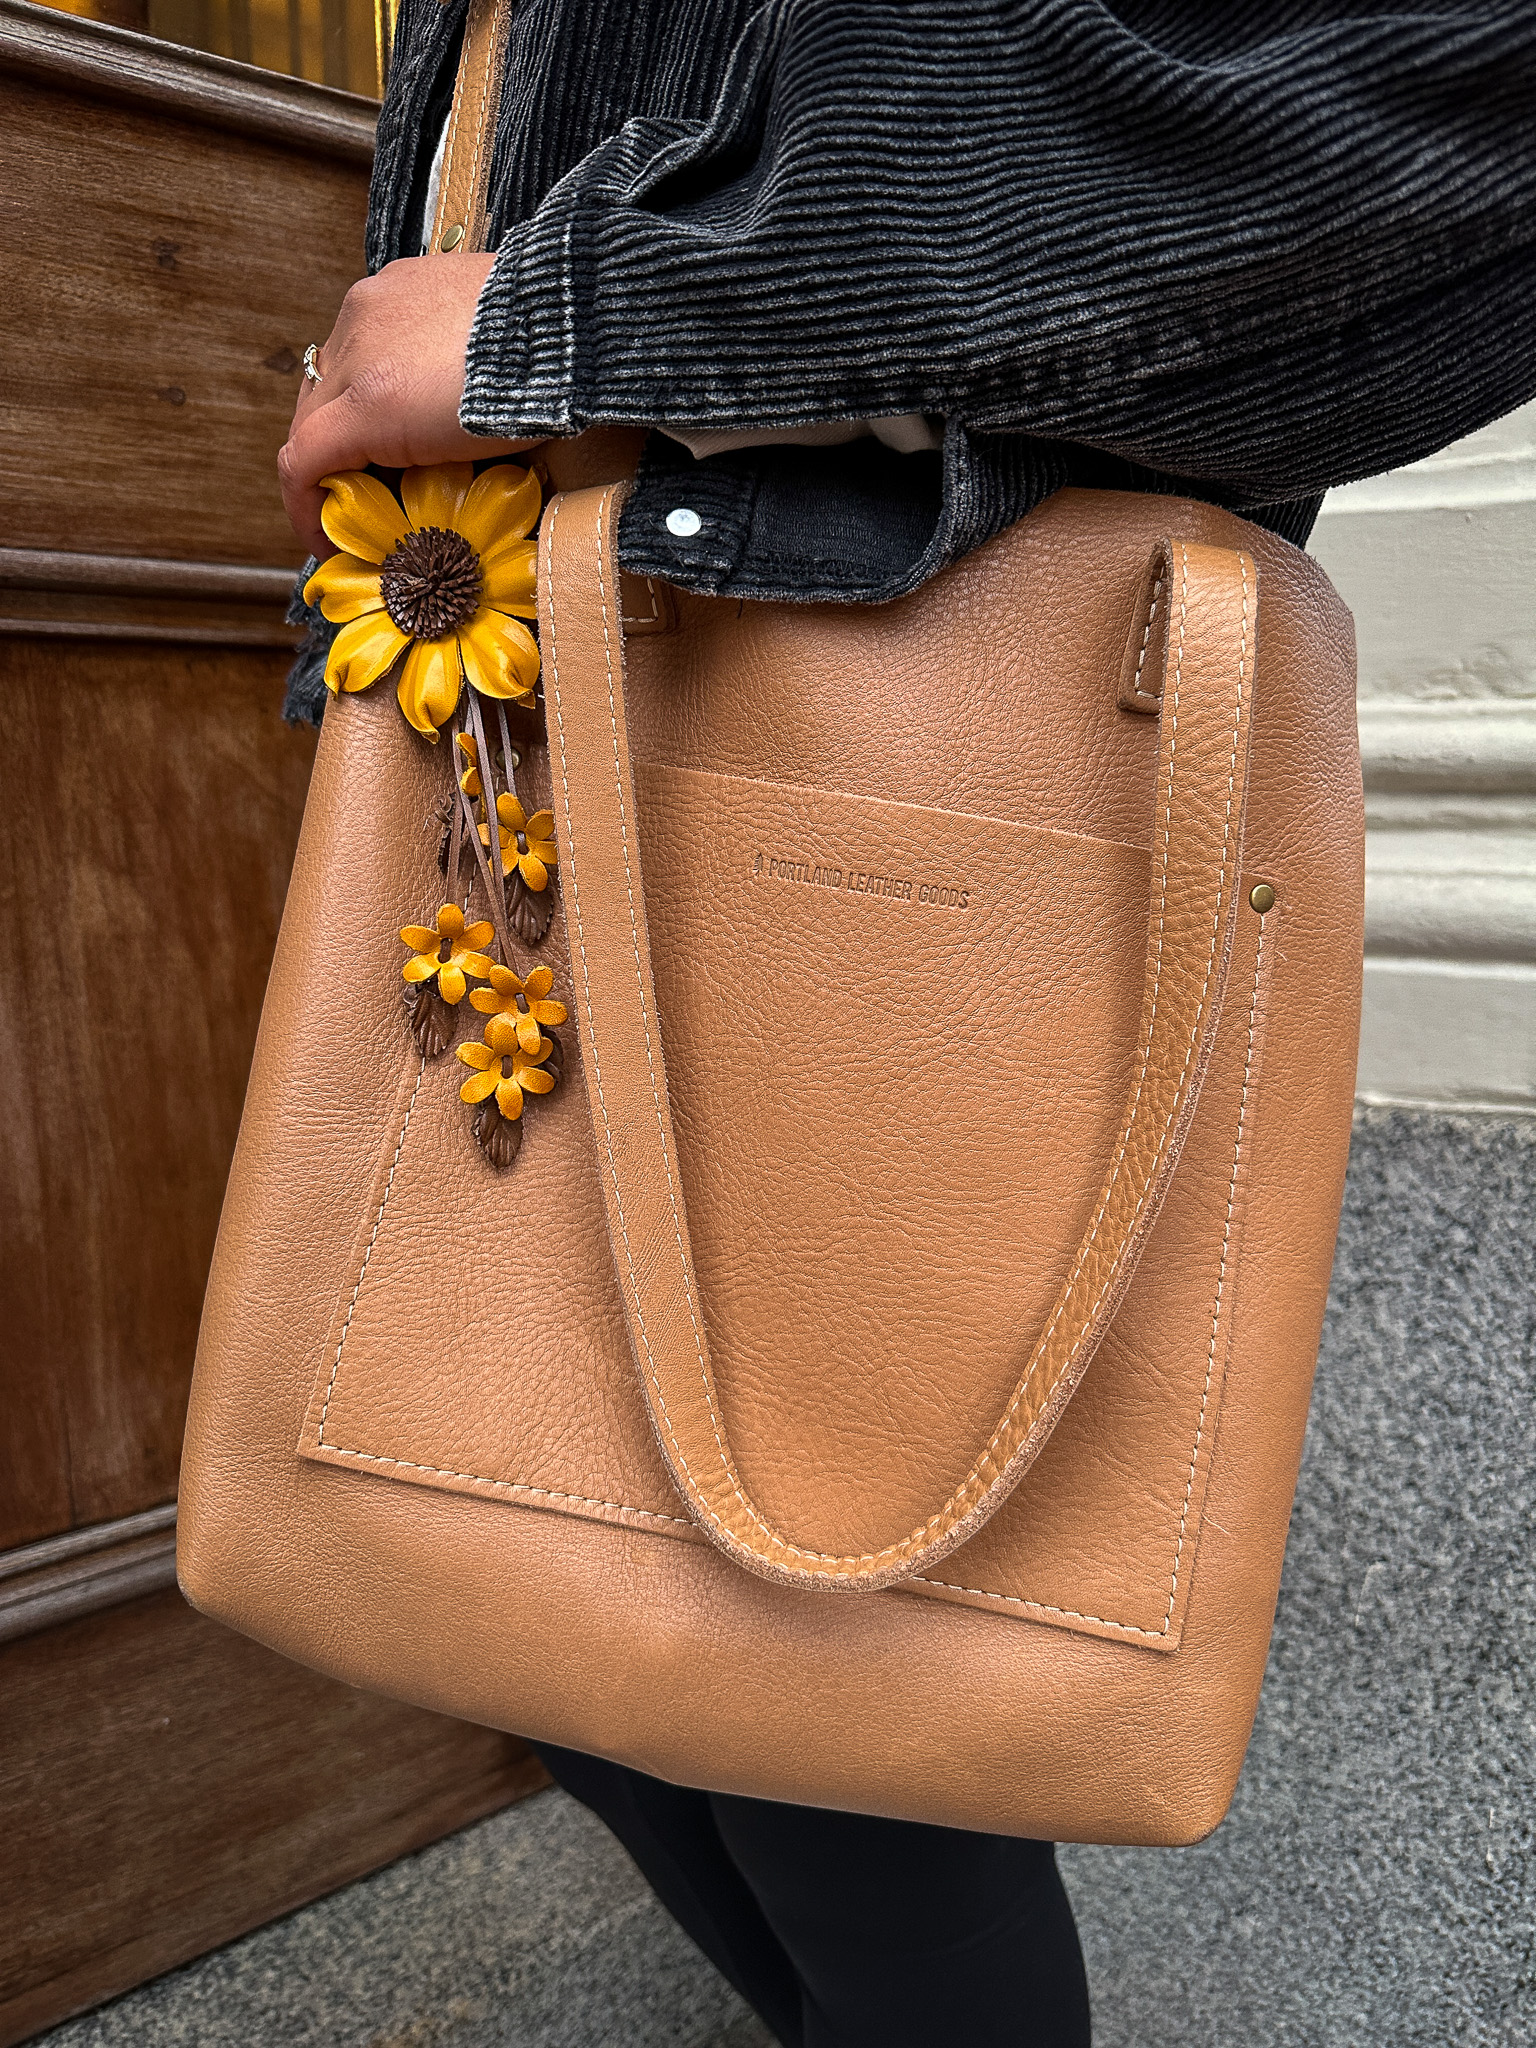 Portland Leather Crossbody Tote review